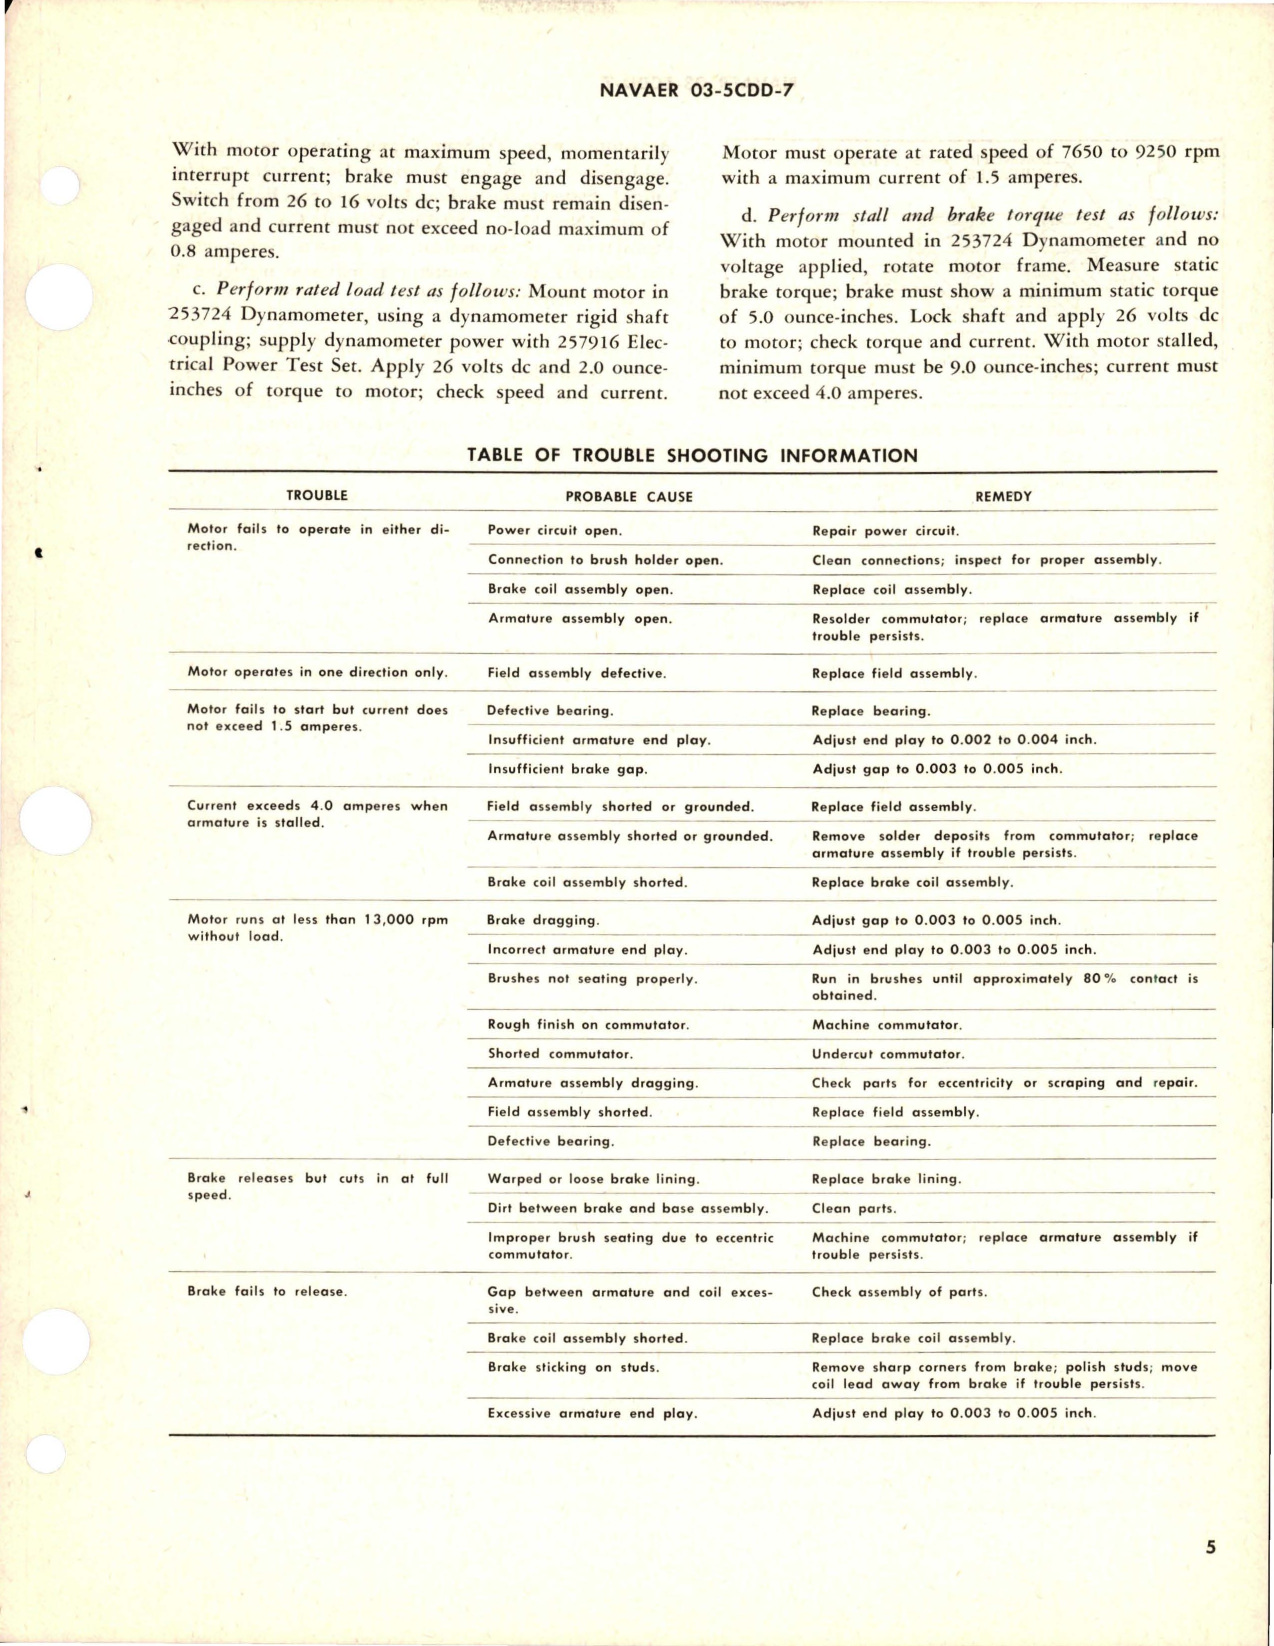 Sample page 5 from AirCorps Library document: Overhaul Instructions with Parts Breakdown for Direct Current Motor - Part 32746 - Model DCM15-117-1